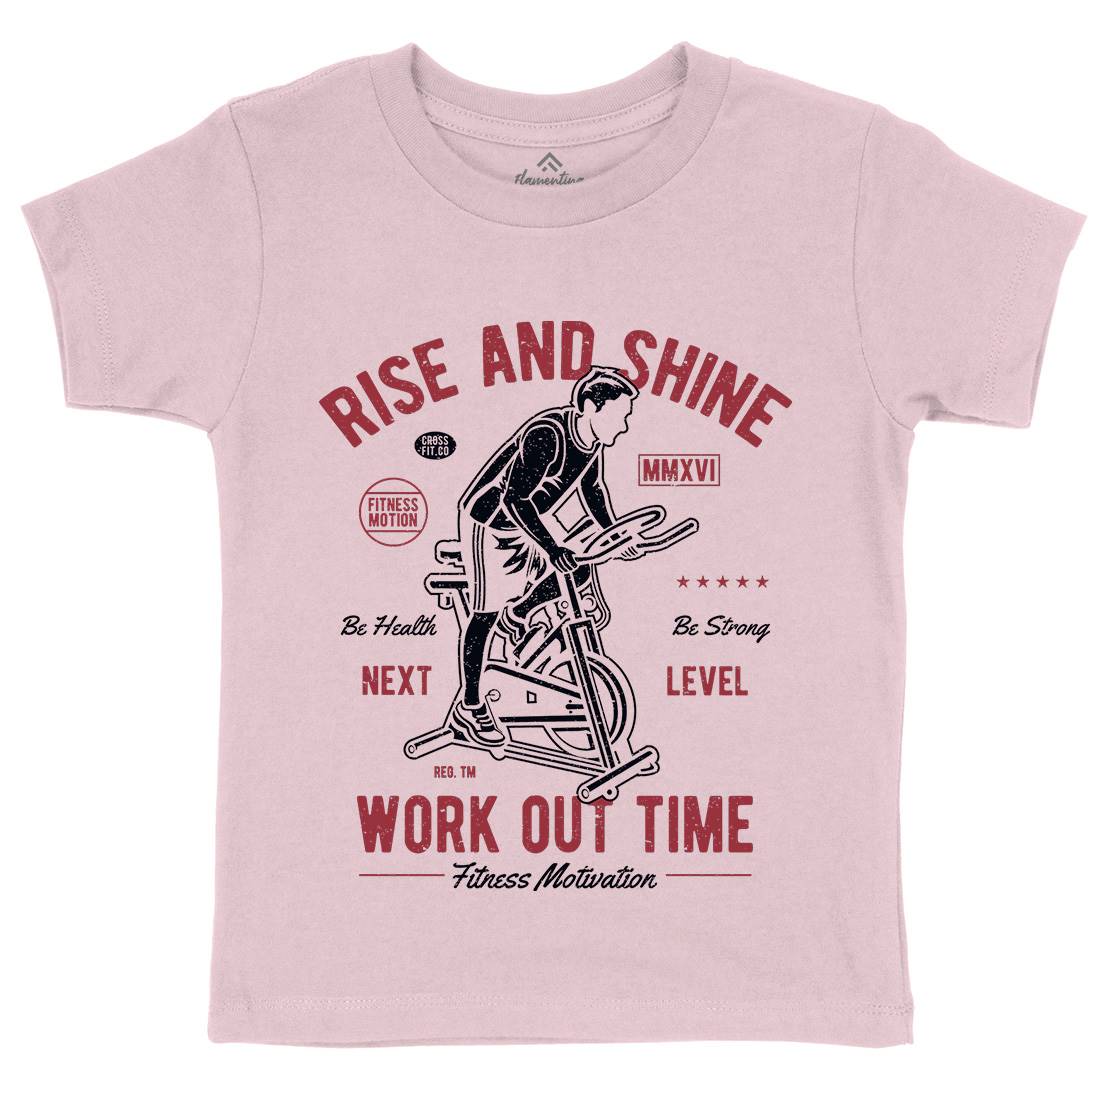 Work Out Time Kids Organic Crew Neck T-Shirt Gym A199